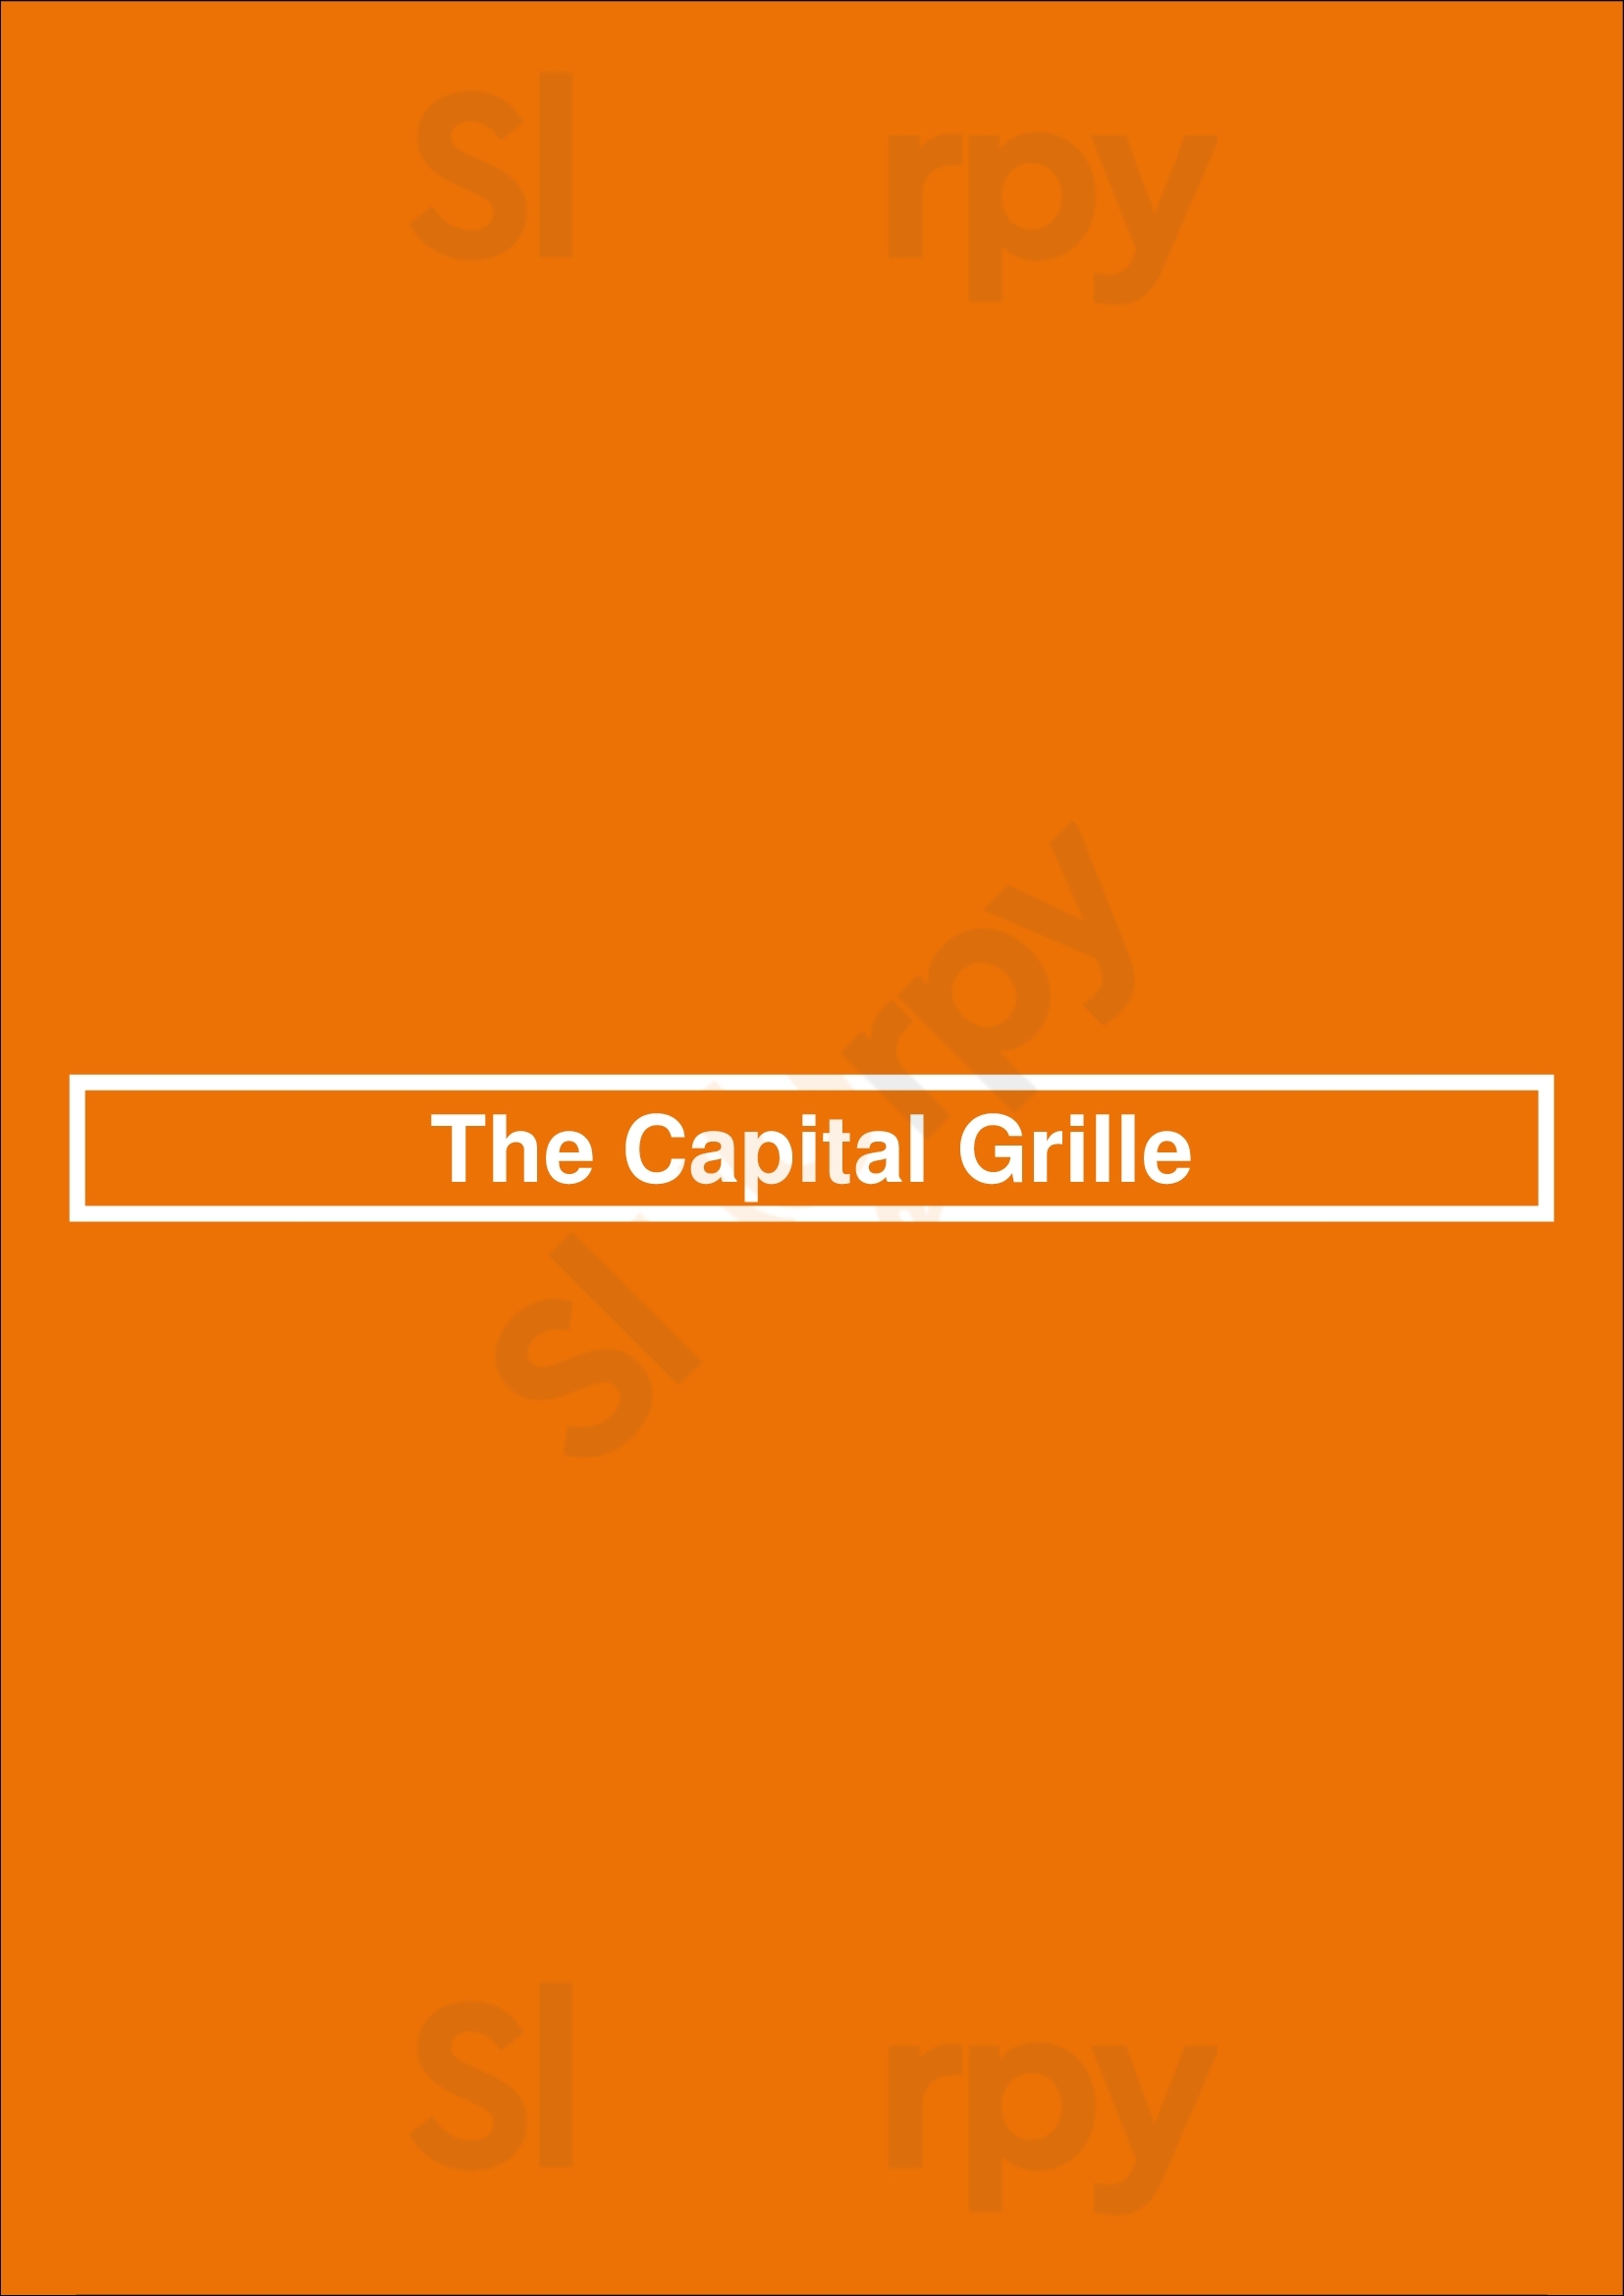 The Capital Grille Fort Worth Menu - 1